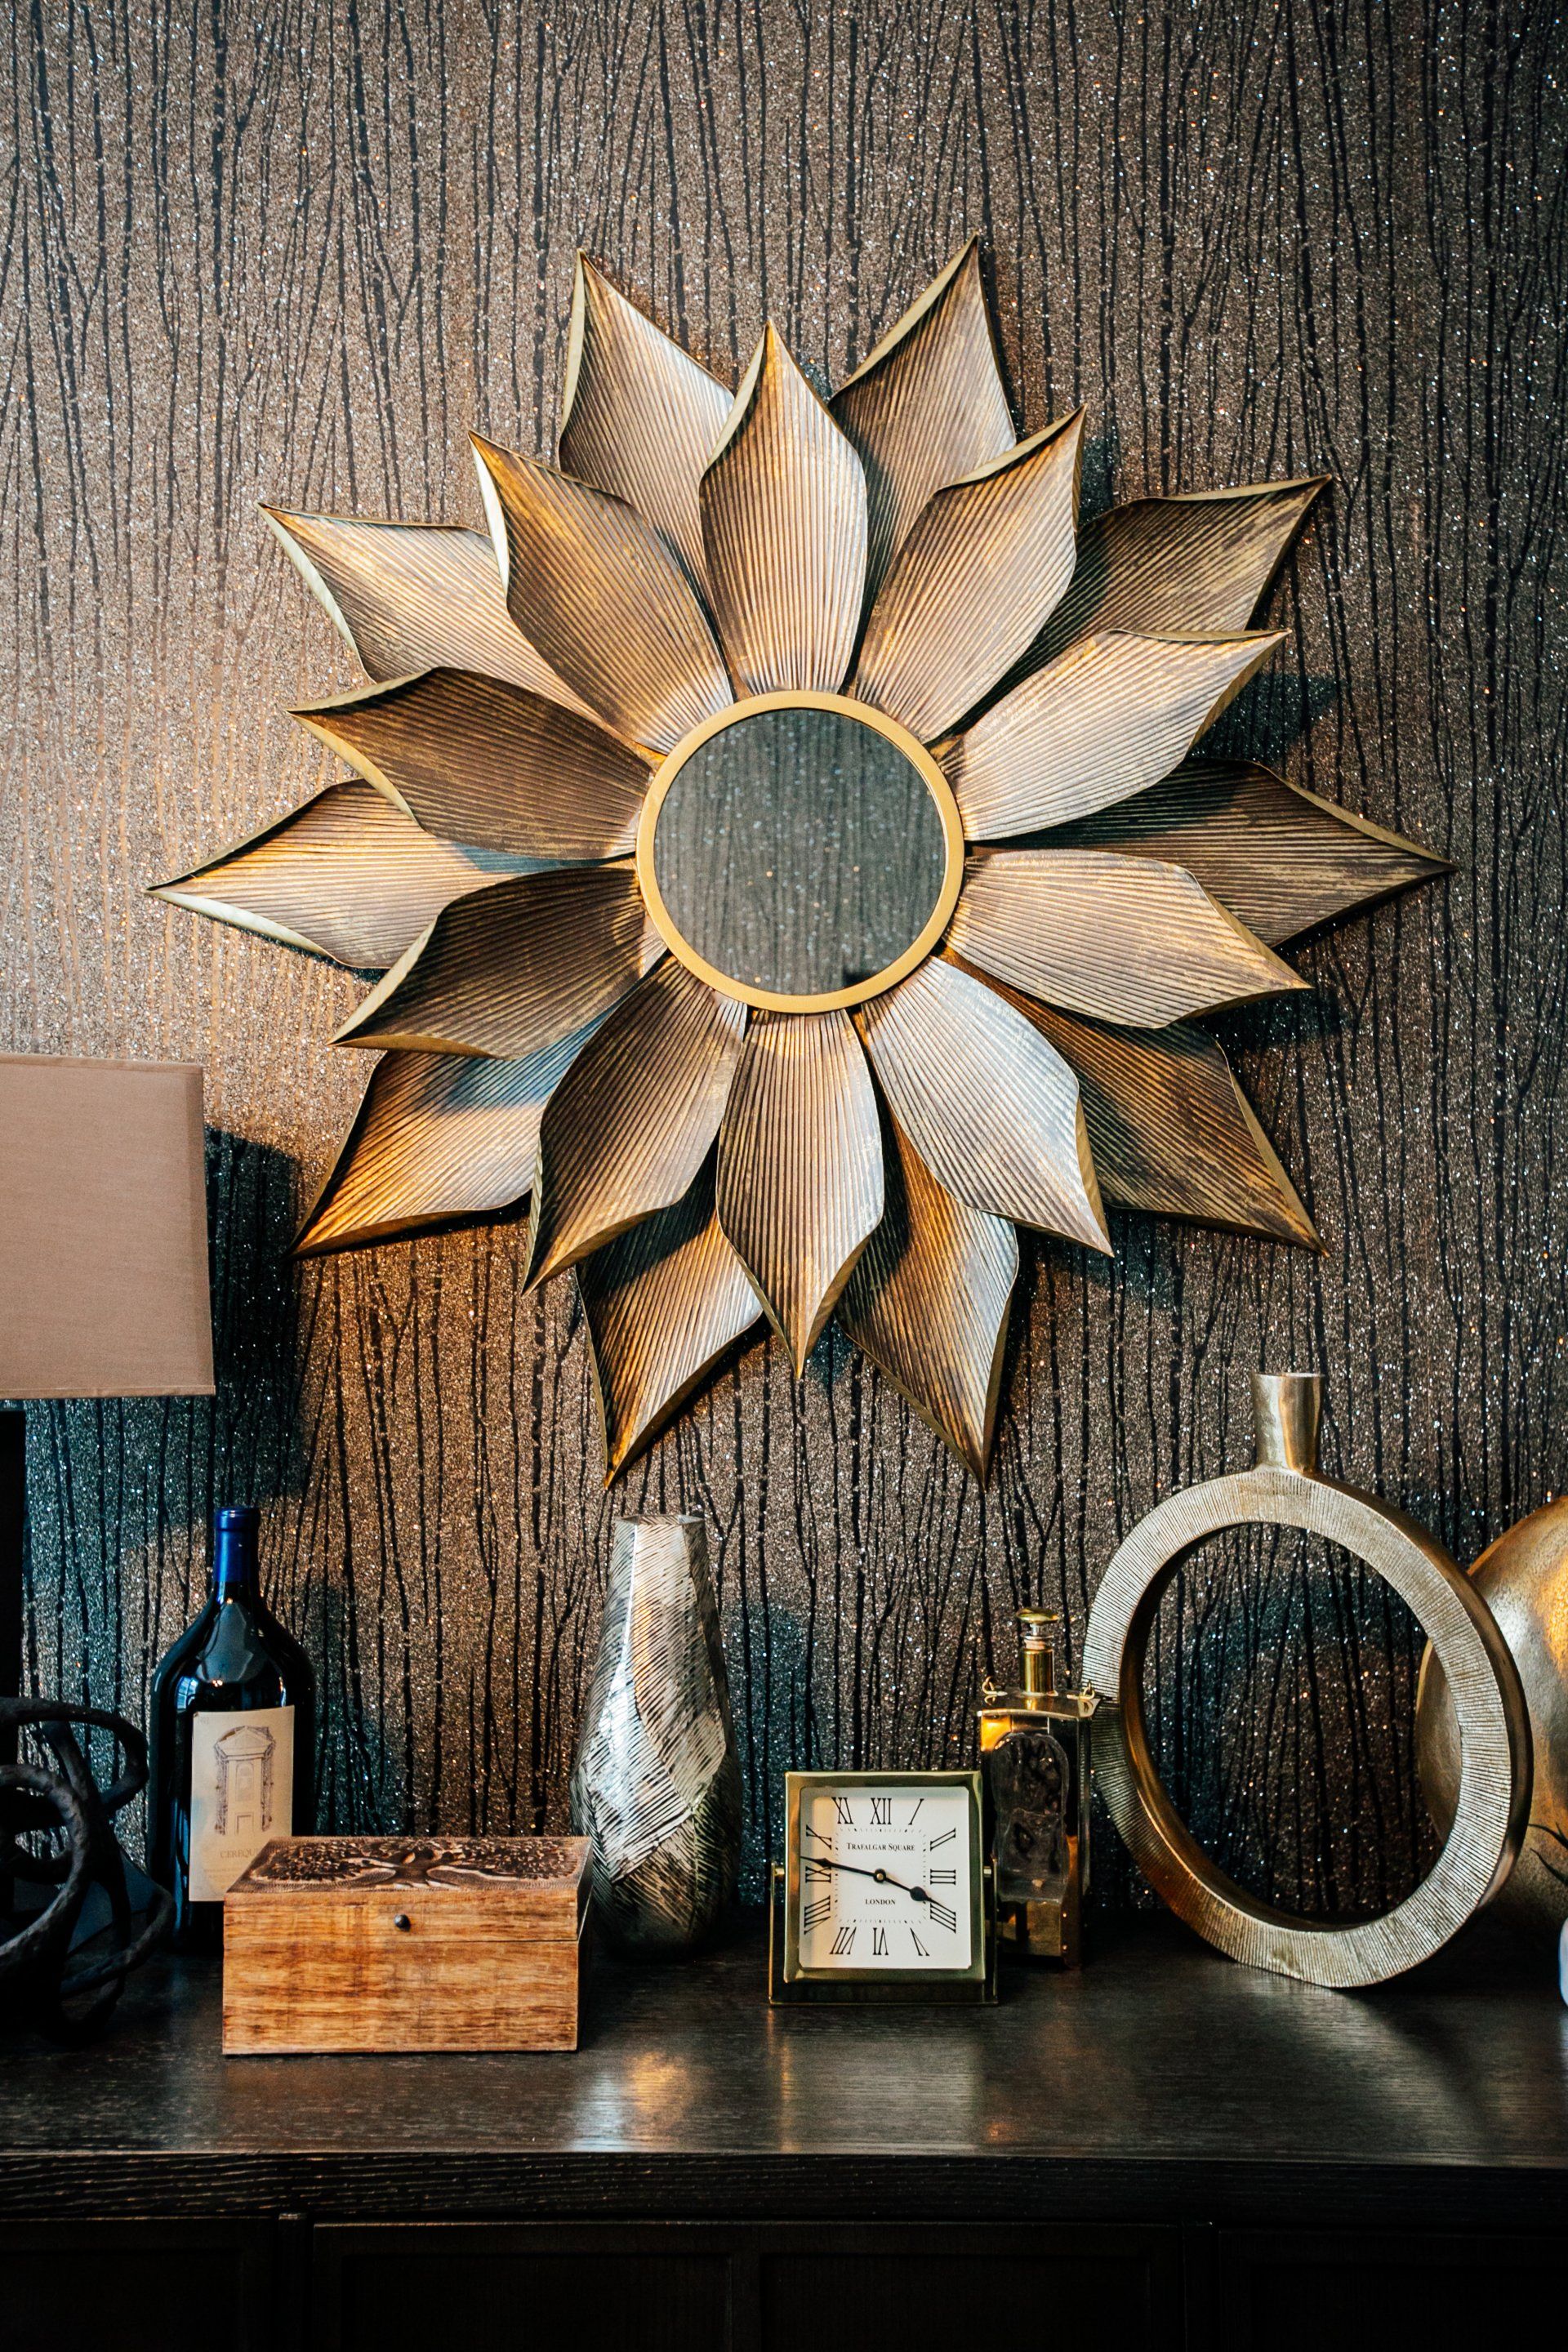 Flower petal mirror on wall with brown and black wood patterned wallpaper